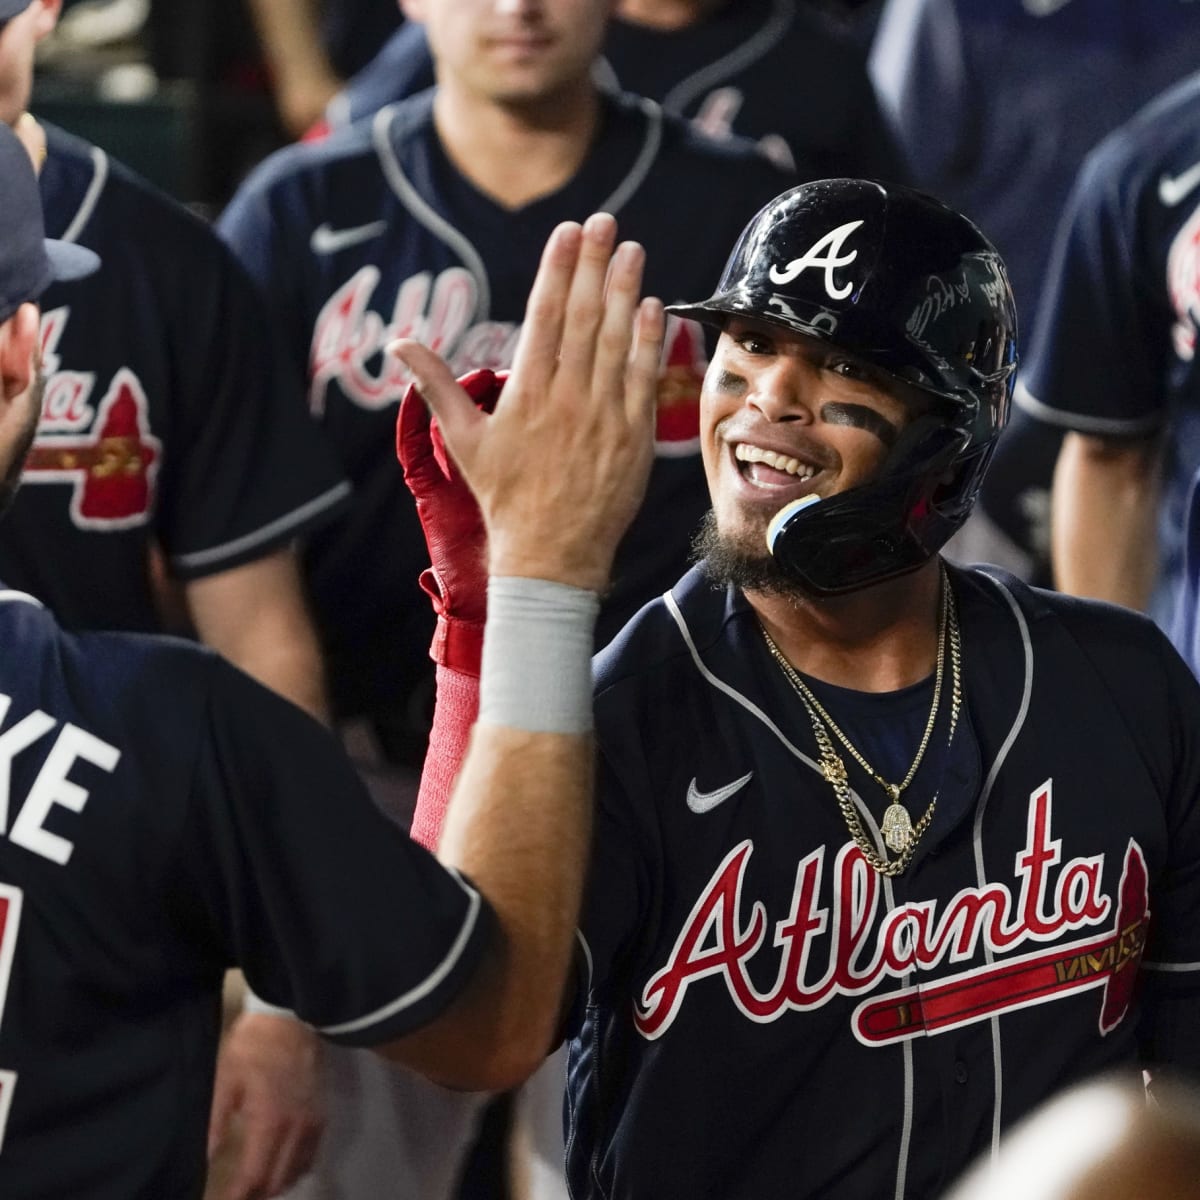 Atlanta Braves Make Subtle But Strong Changes To Their Uniforms